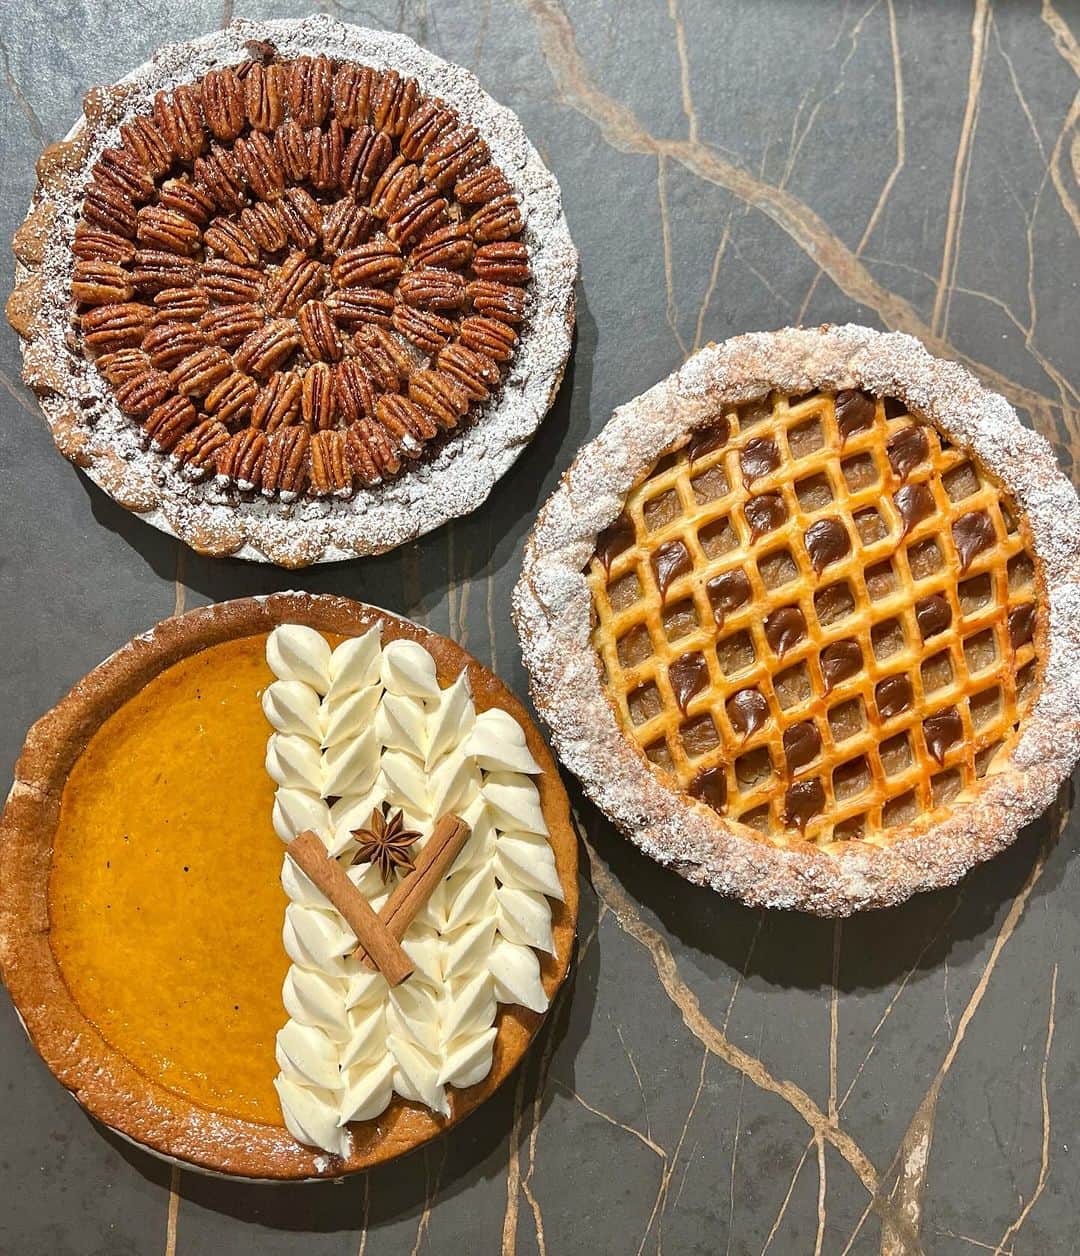 DOMINIQUE ANSEL BAKERYのインスタグラム：「Our Thanksgiving pies are here! Extra Silky Pumpkin Pie (triple strained for a smooth creamy pumpkin custard in a gingerbread crust with vanilla Chantilly); Bourbon Pecan (crunchy toasted pecans with gooey brown sugar molasses in a vanilla sablé crust); and Salted Caramel Apple Pie (with honeycrisp apples in a flaky lattice-topped crust, soft caramel, and Maldon sea salt). Pre-order now for pick-ups TUES 11/21-THURS 11/23, at DominiqueAnselNY.com for SoHo BAKERY pick-ups, and DominiqueAnselWorkshop.com for Flatiron @dominiqueanselworkshop pick-ups. For our new sister shop @dominiqueansellasvegas at @caesarspalace, head to DominiqueAnselLasVegas.com. And yep, we’re shipping nationwide too ✈️ (Bourbon Pecan and Salted Caramel pies only) at DominiqueAnselOnline.com. T-minus 3 weeks til the big day! 🥧🦃🍎」